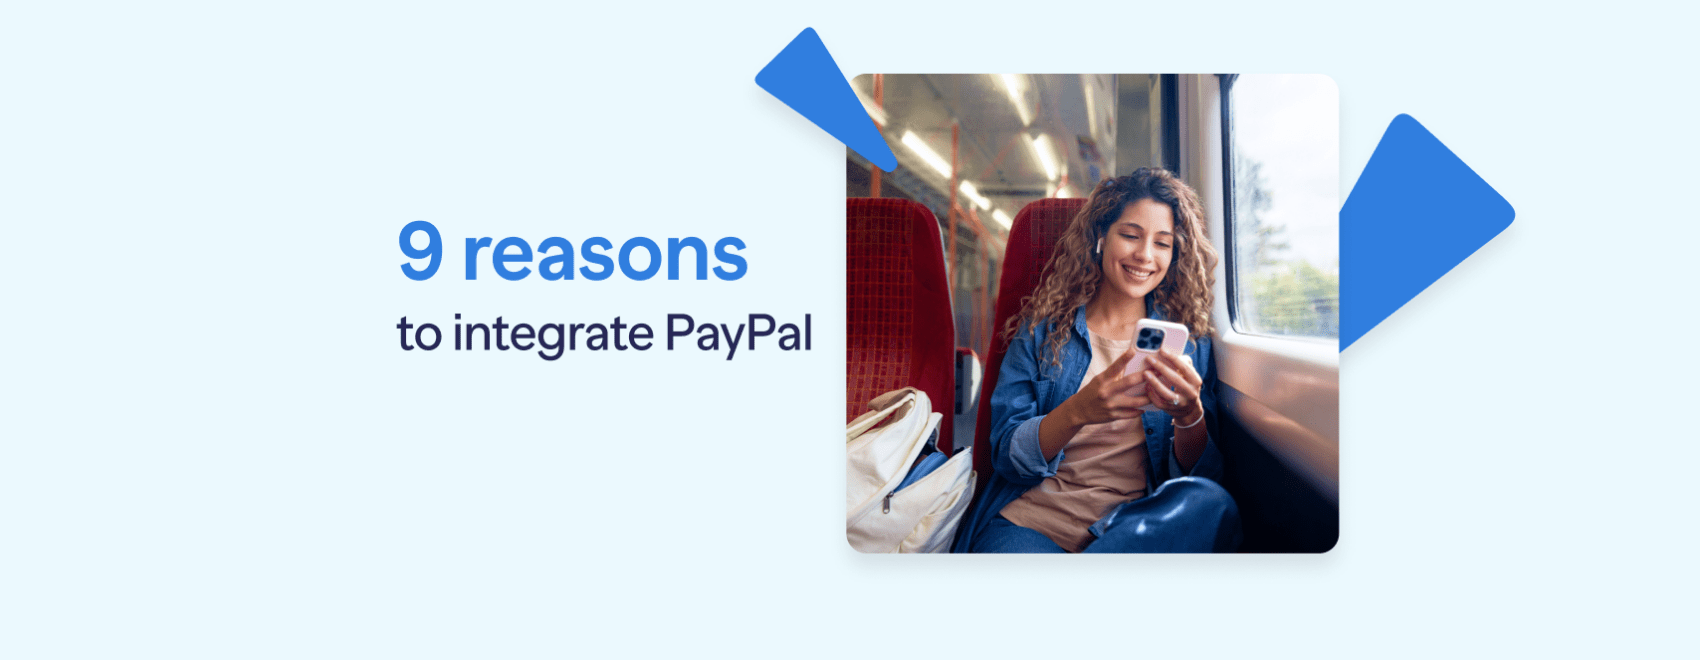 9 reasons to integrate PayPal